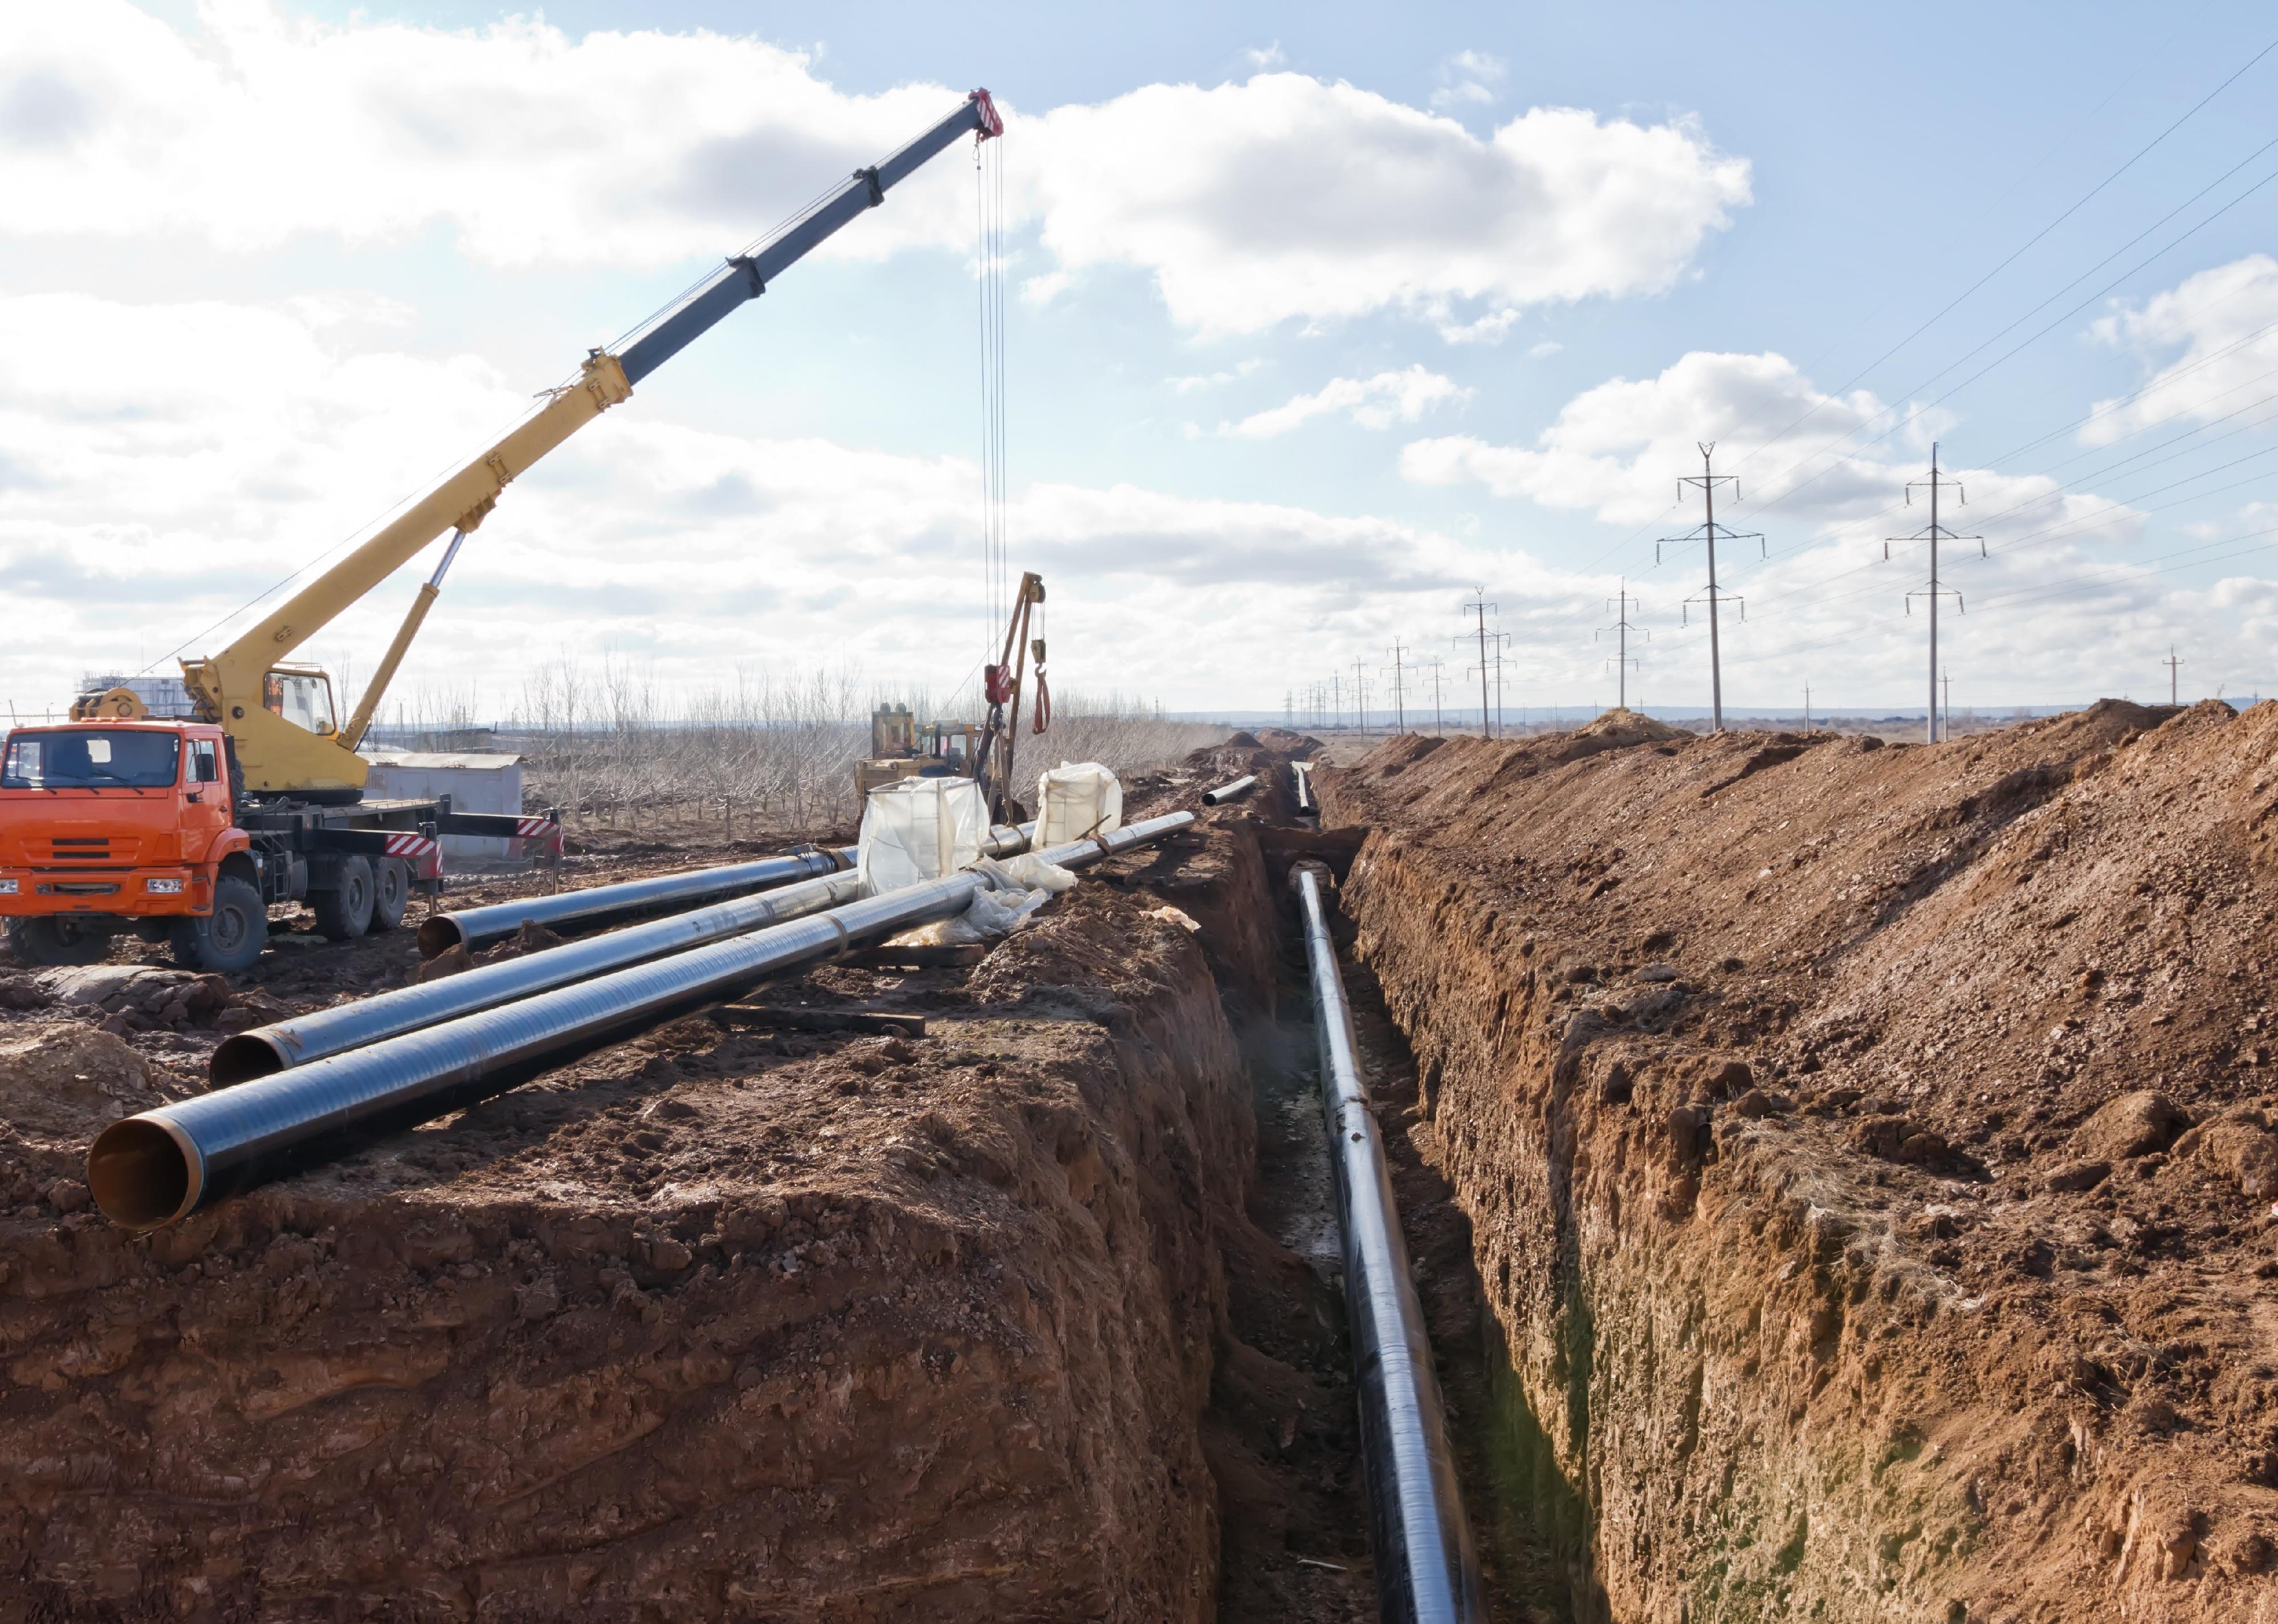 A pipeline being worked on.